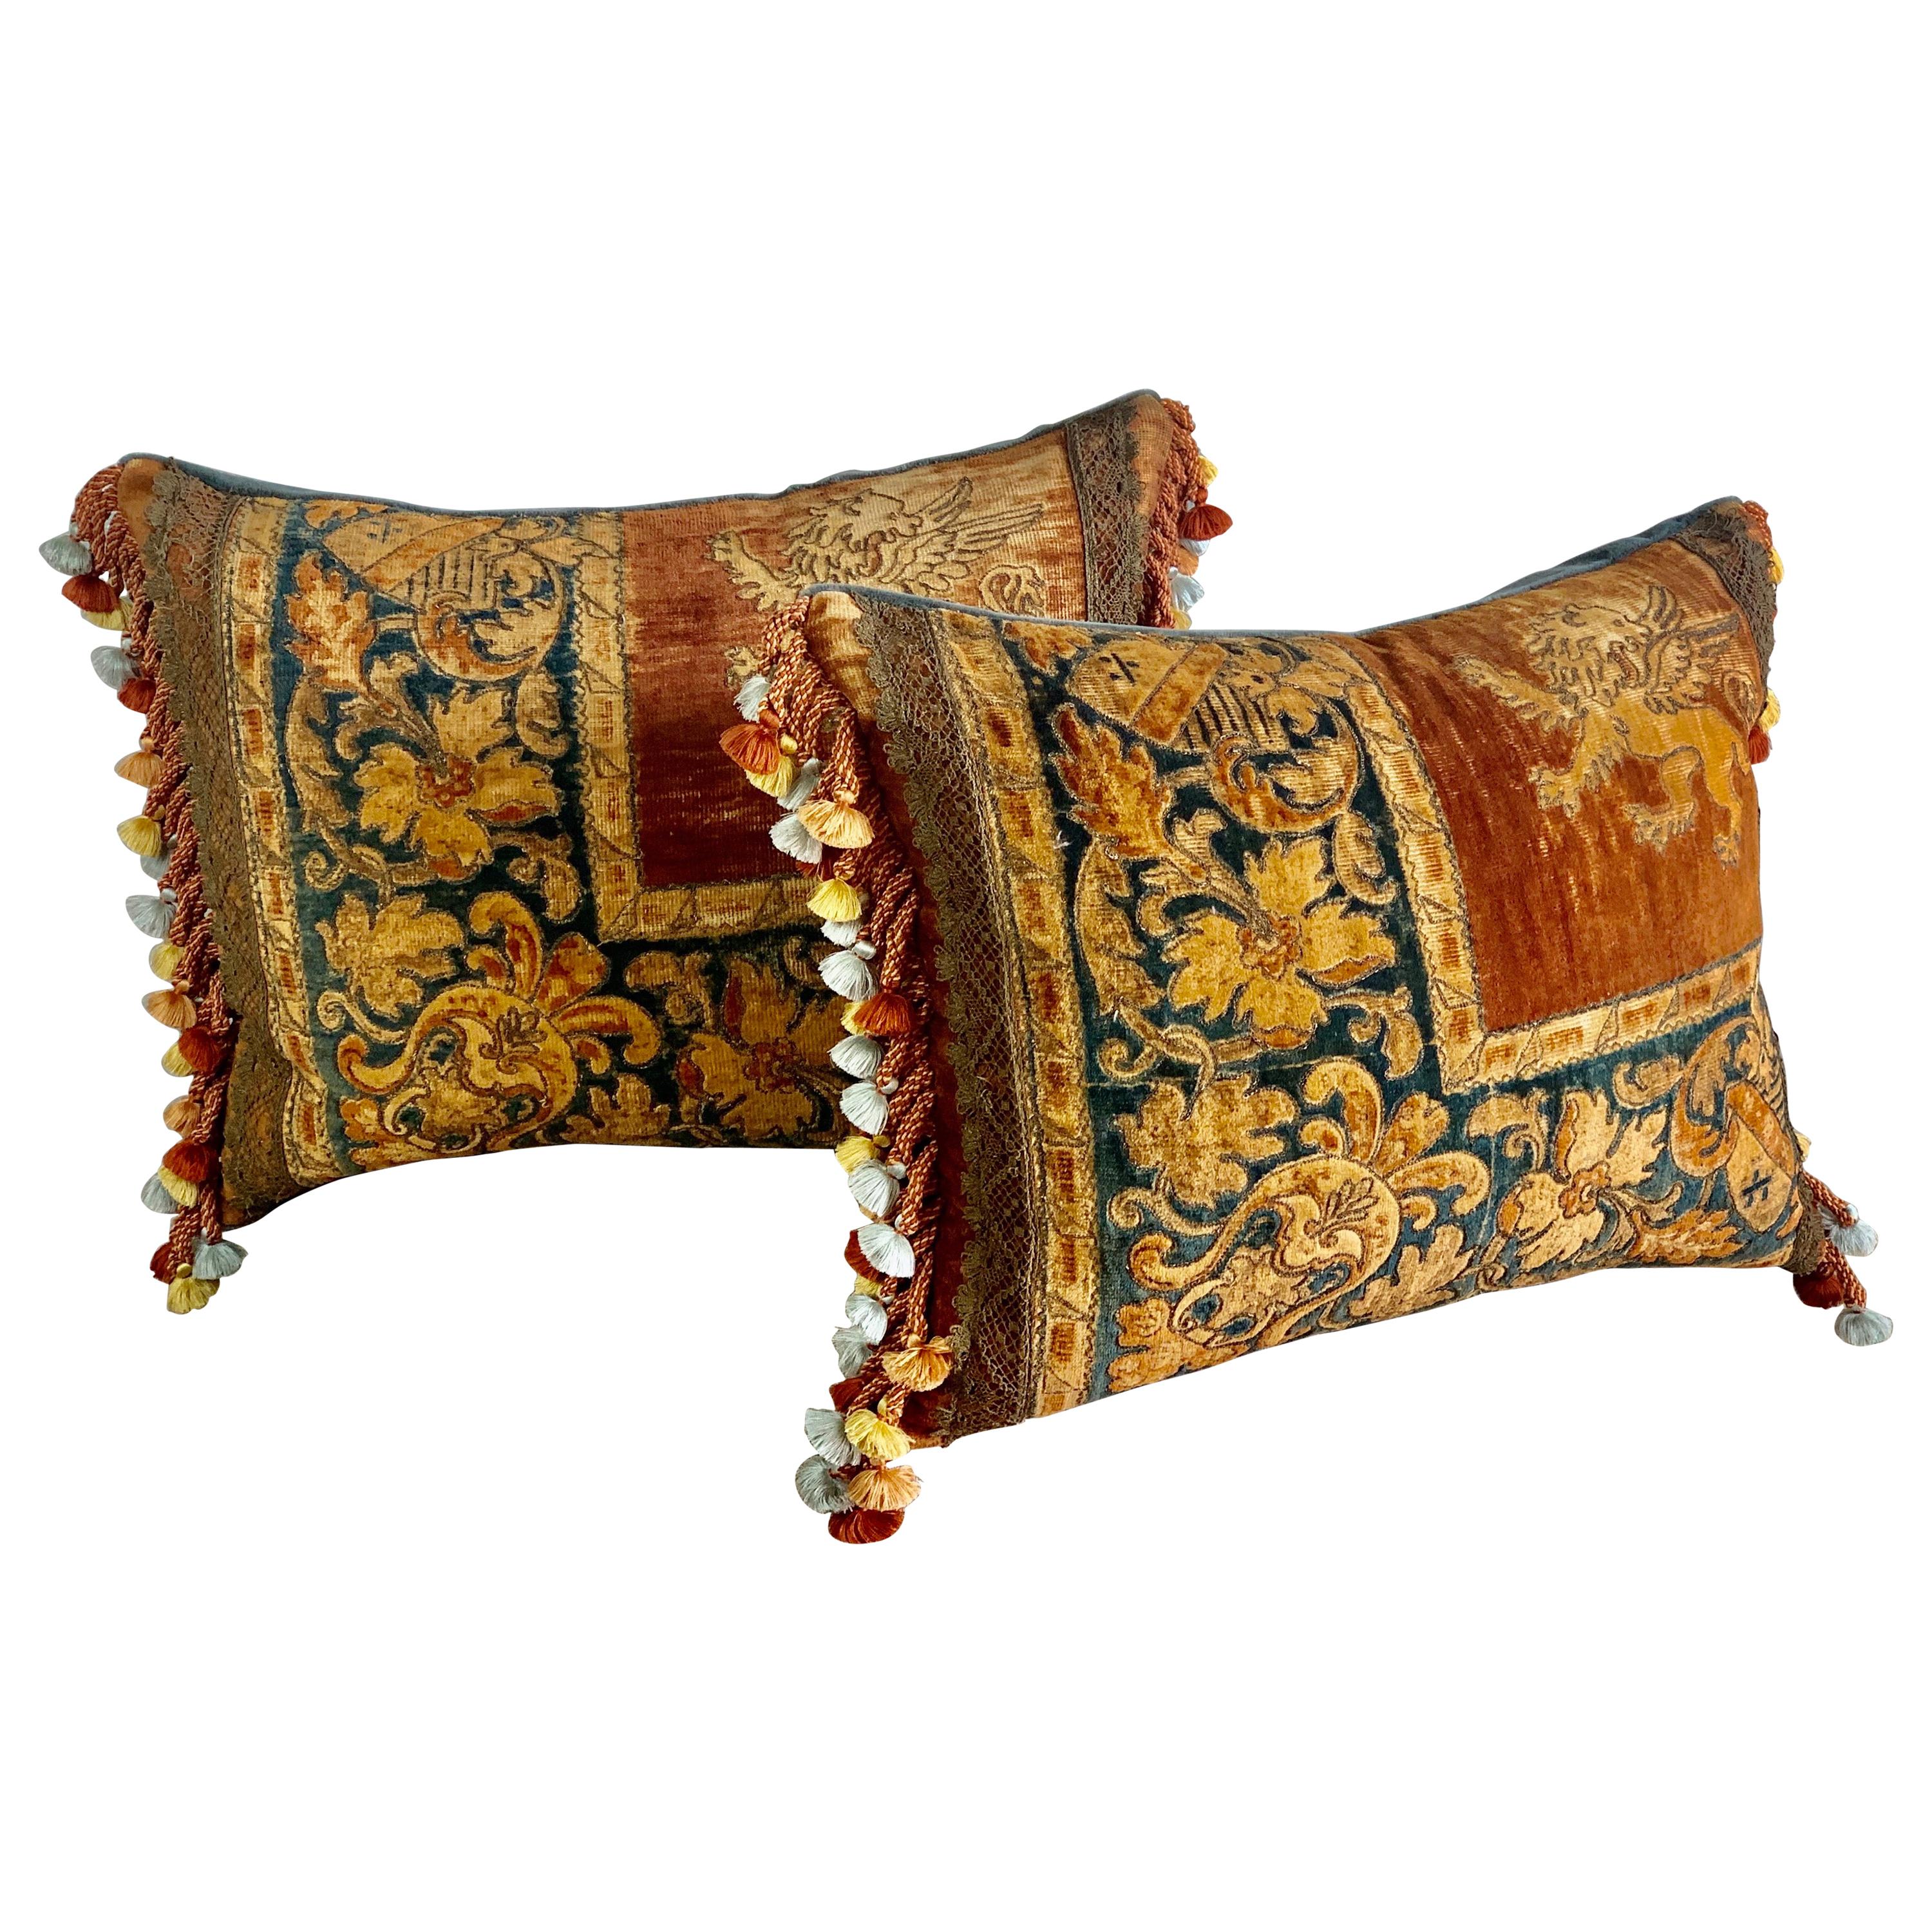 Pair of Italian Embroidered Mohair Pillows with Lions by Melissa Levinson